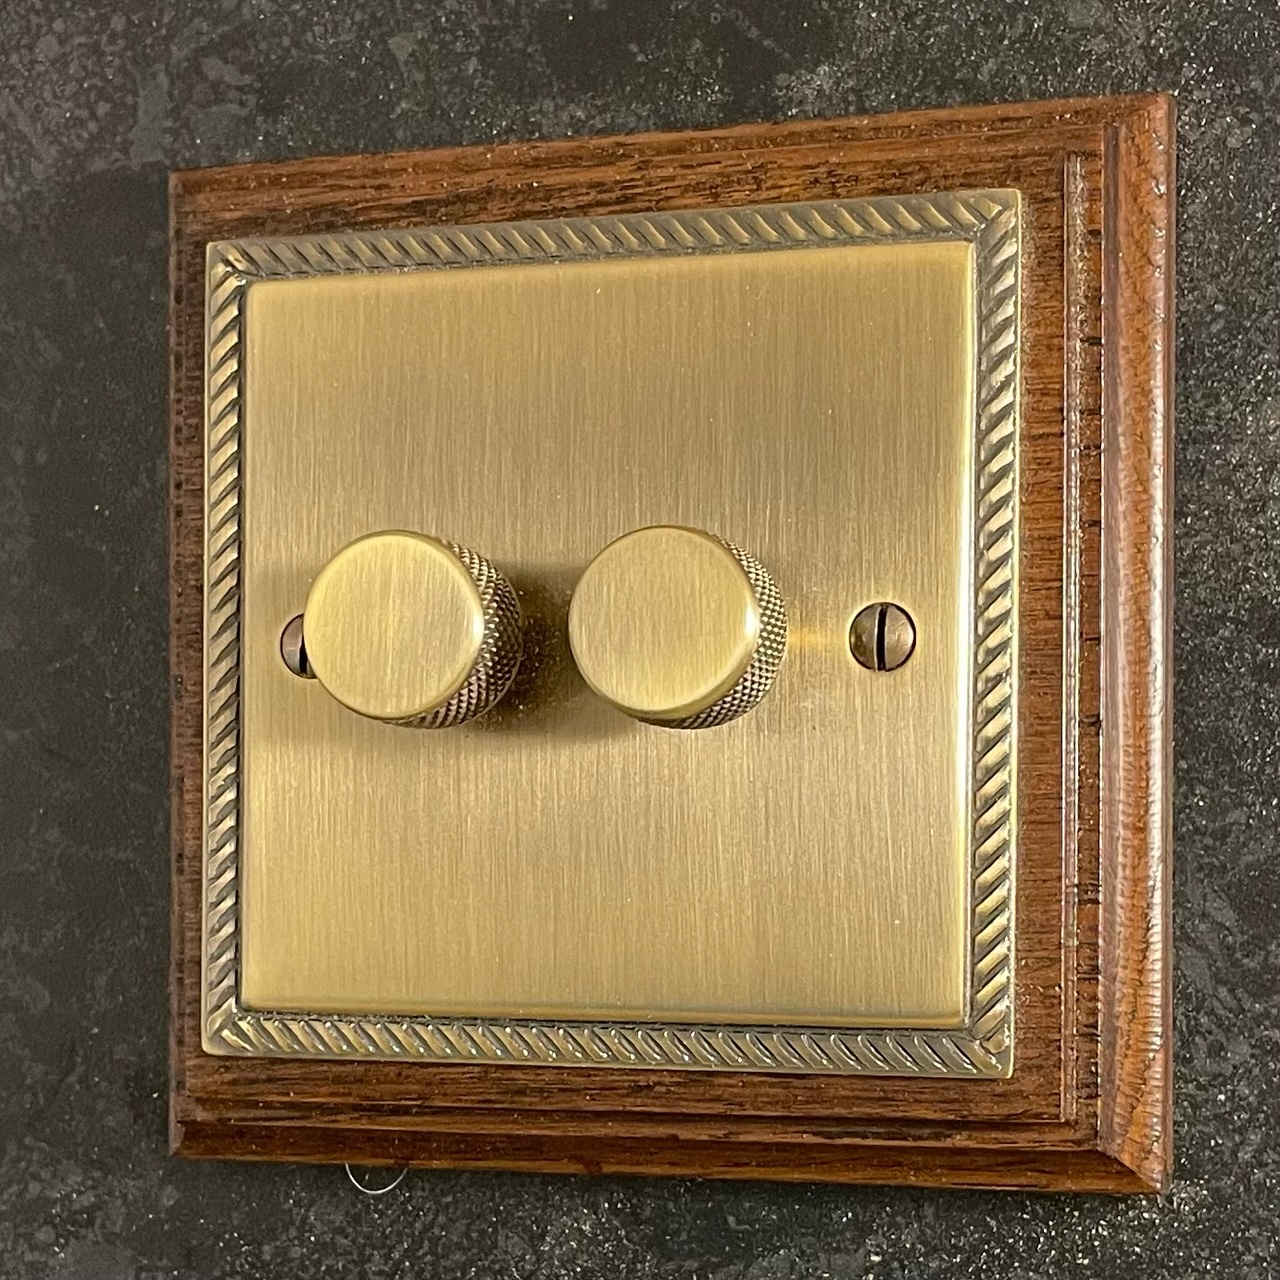 GFPD02 Georgian Flat Plate Double Dimmer Switch